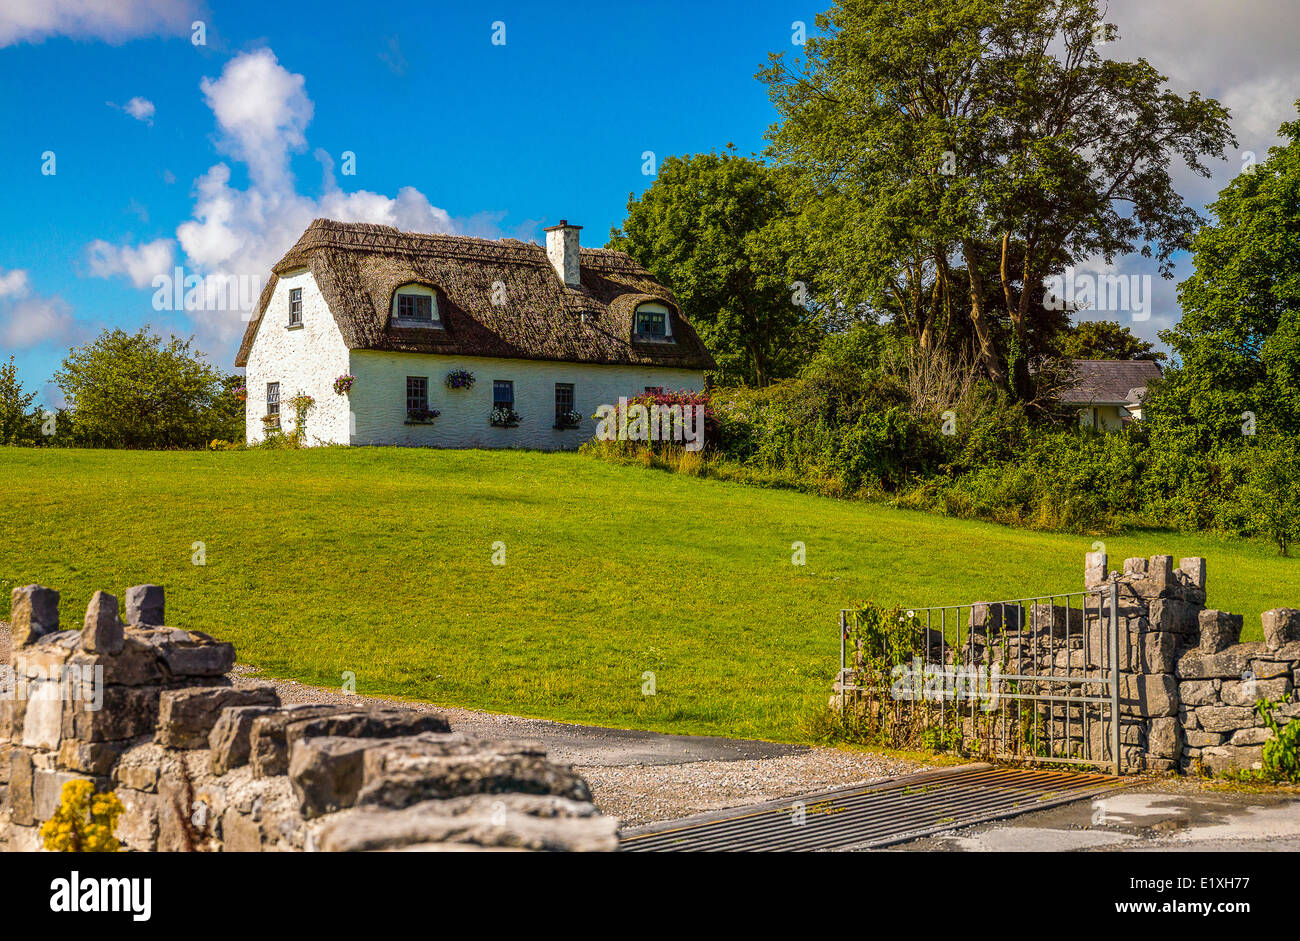 Ireland, Galway county, traditional country houses in the Dunguaire castle area Stock Photo